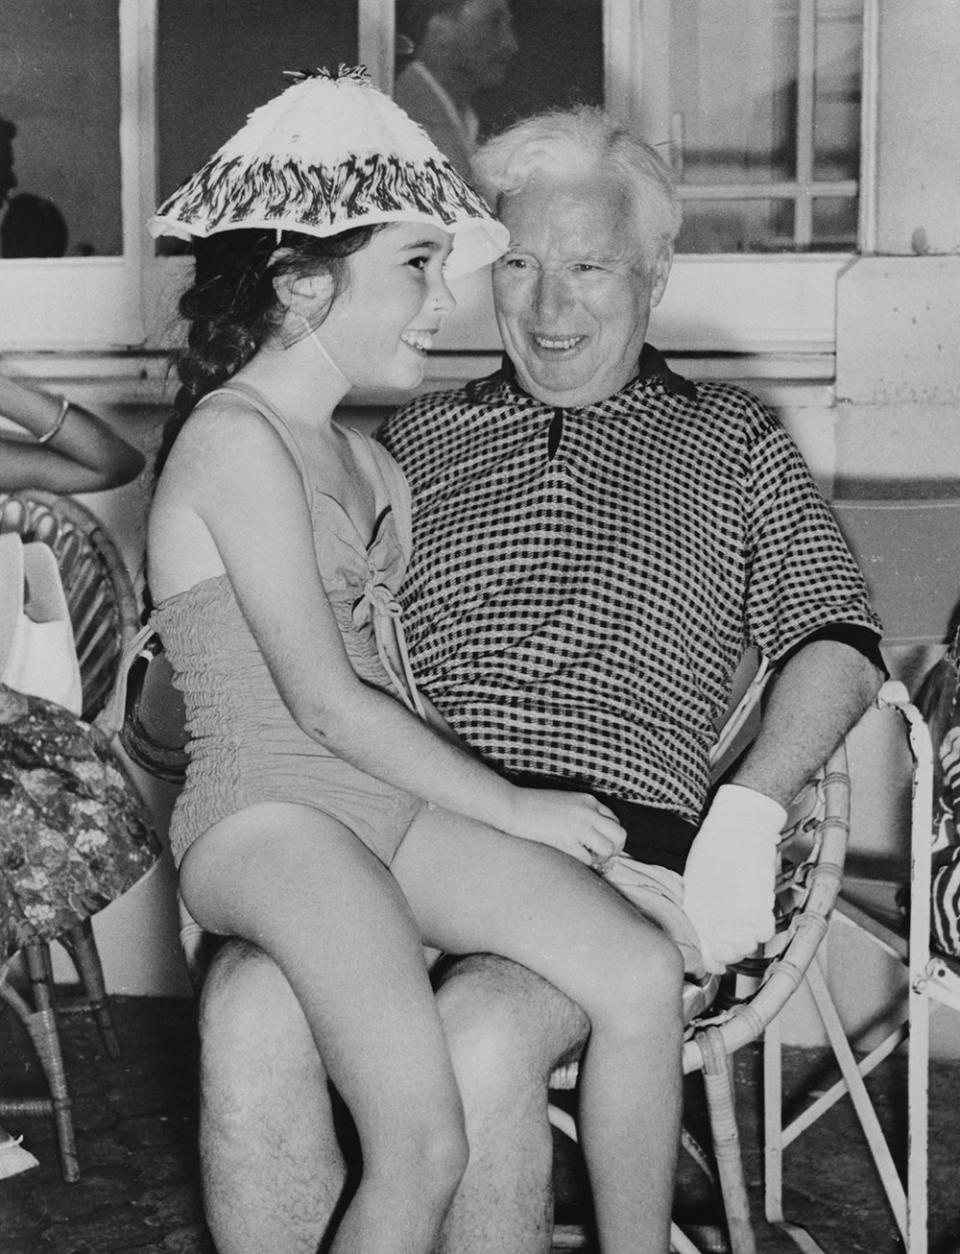 English actor and filmmaker Charlie Chaplin with his daughter Josephine during a summer vacation at their villa in Saint-Jean-Cap Ferrat, southeastern France, 15th July 1957.